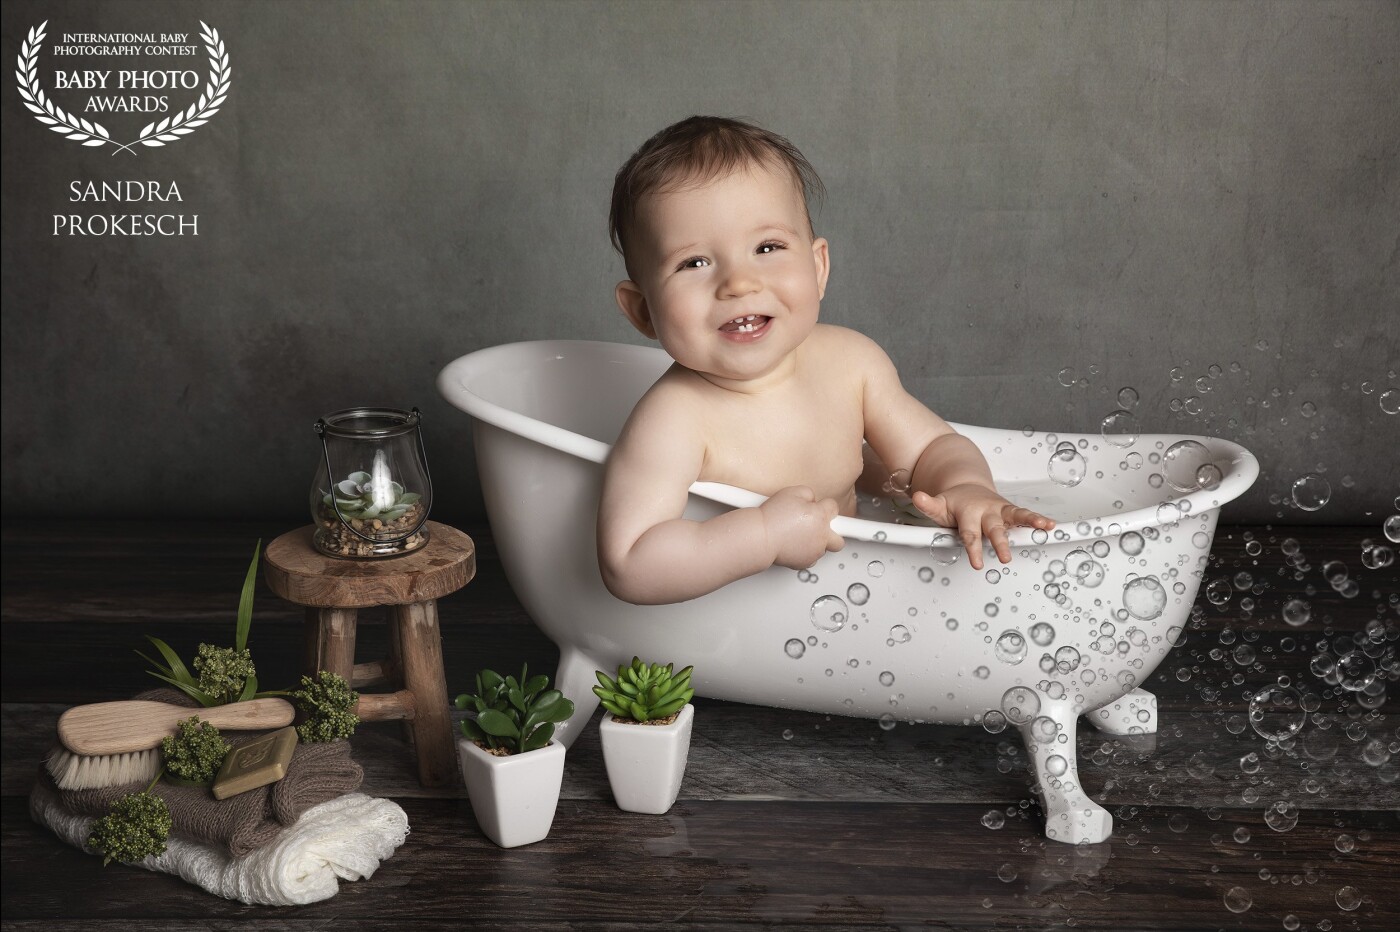 This adorable little boys photo was taken in my home studio and this carismatic little boy really enjoyned his session in the warm water. That smiling face truly stole my heart. I absolutely love taking photos of babies and children. 